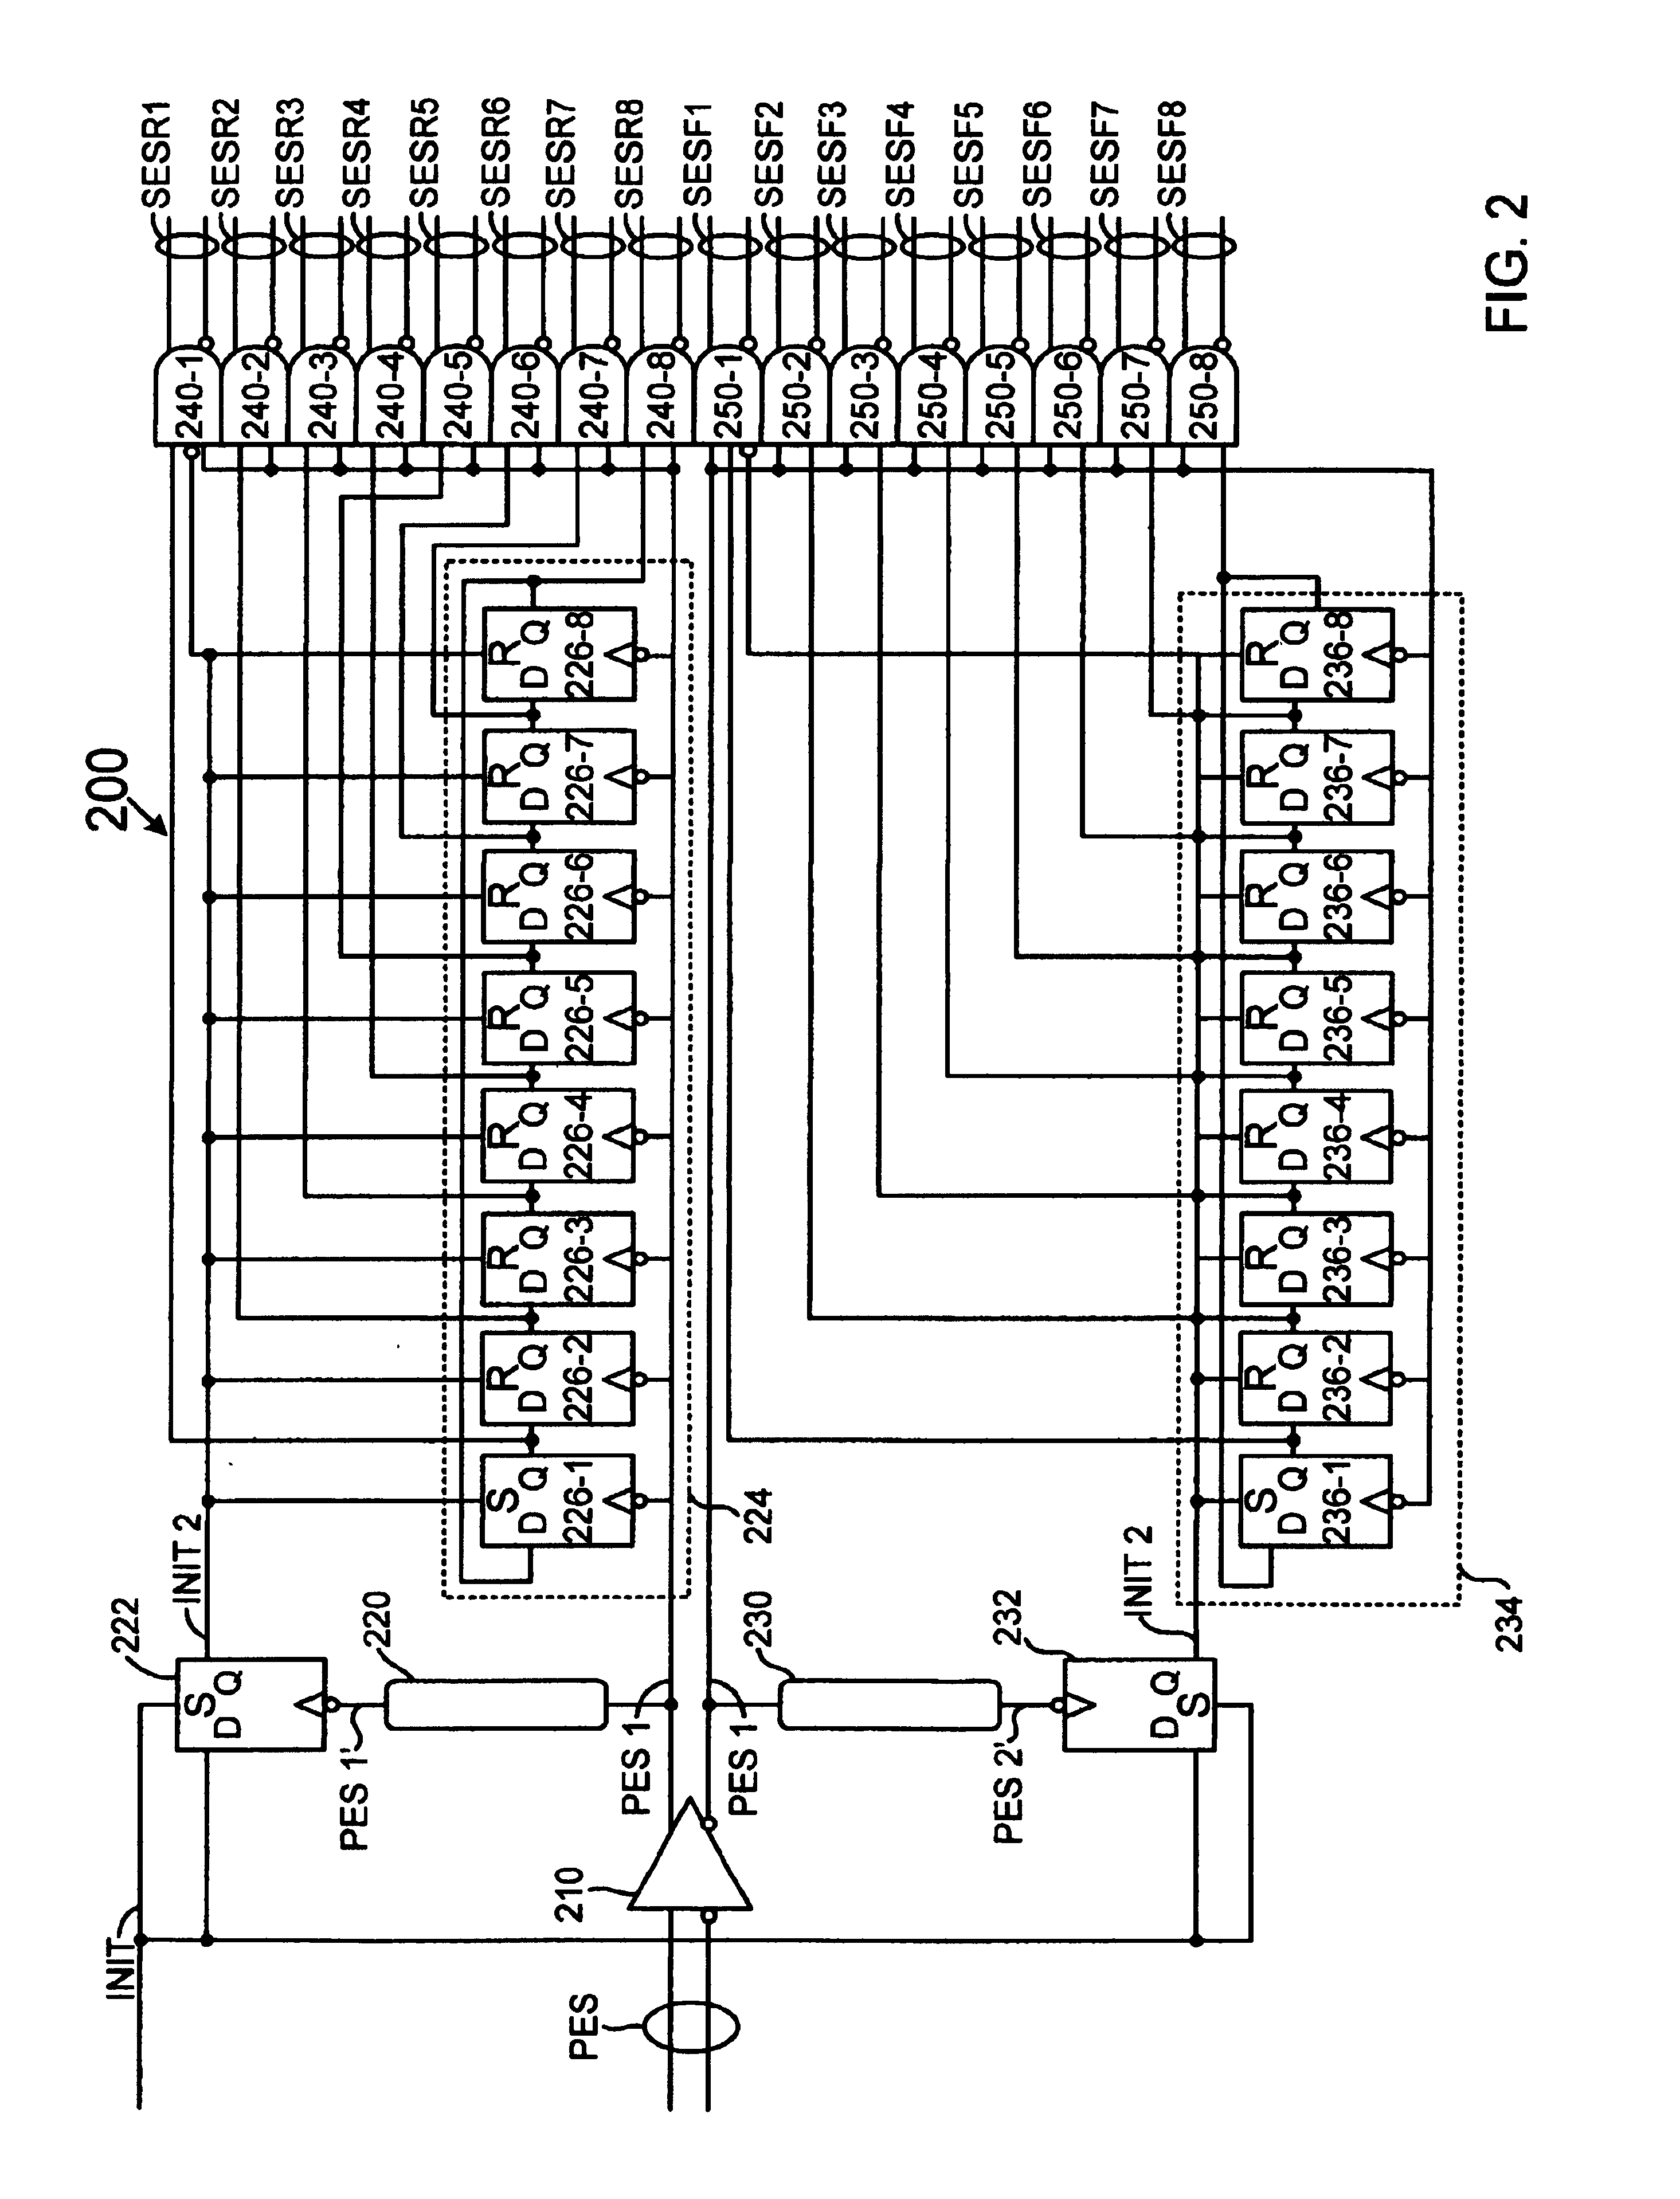 Circuit and method for distributing events in an event stream